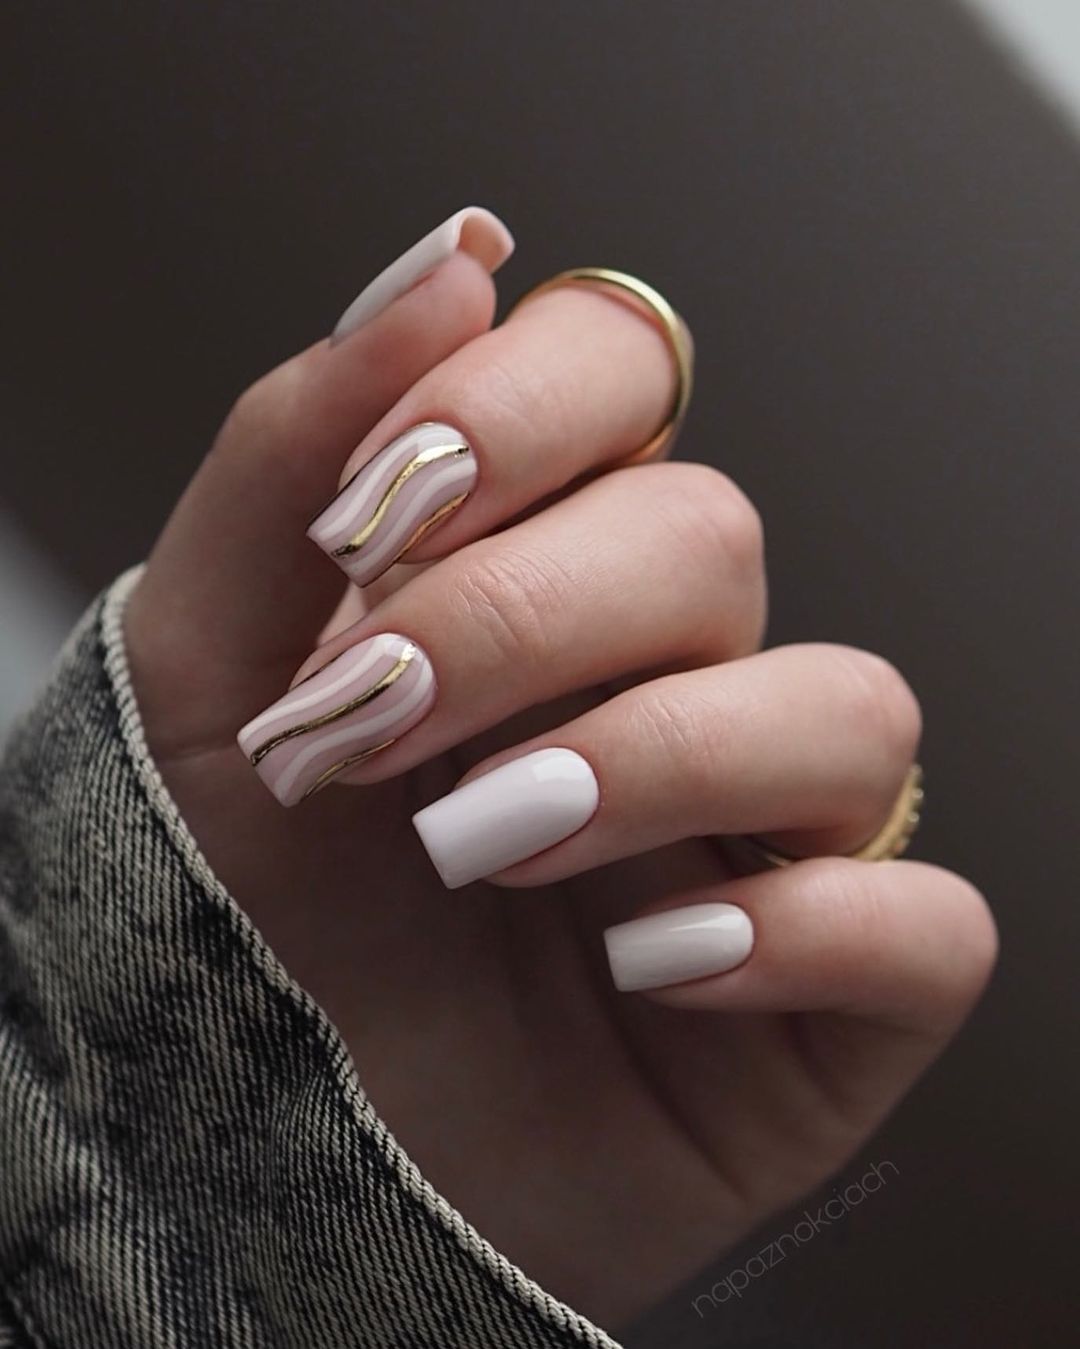 Nude Square Nails with Gold Swirls